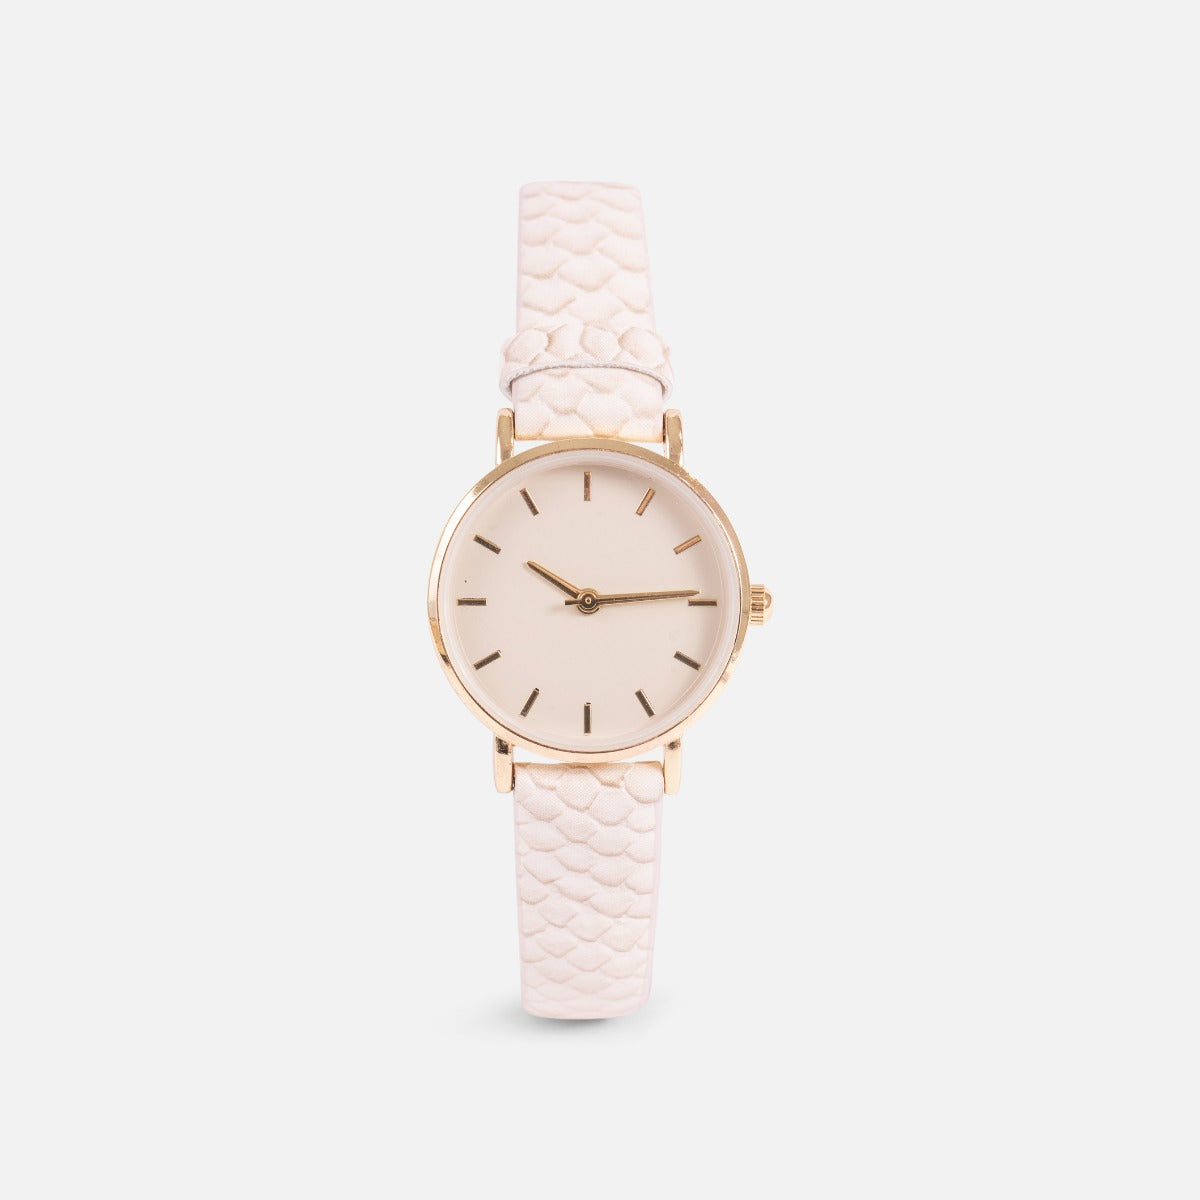 Unik collection - watch with ivory snakeskin strap and tone-on-tone dial